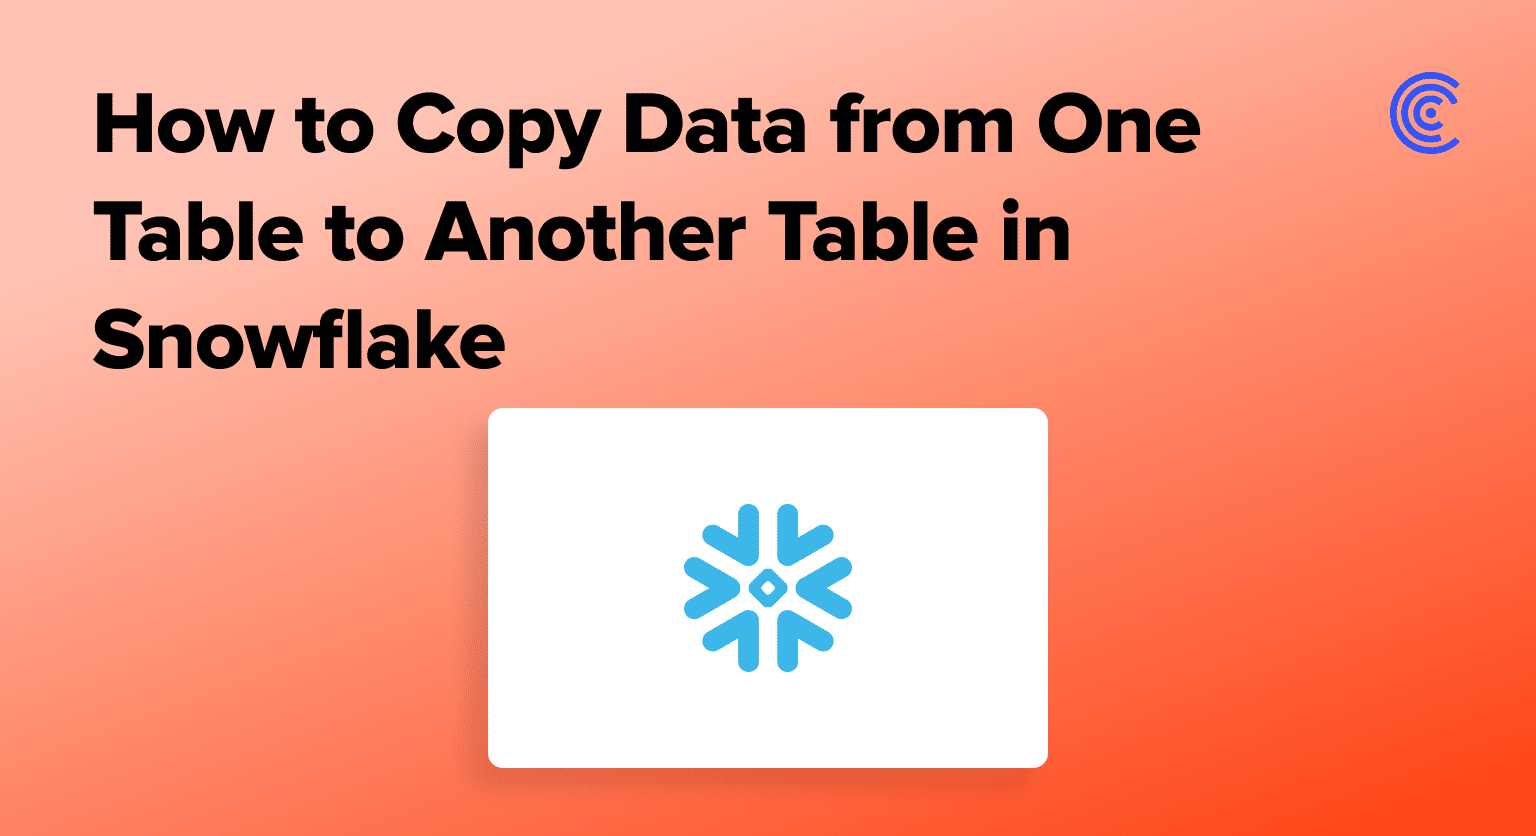 How to Copy Data from One Table to Another Table in Snowflake